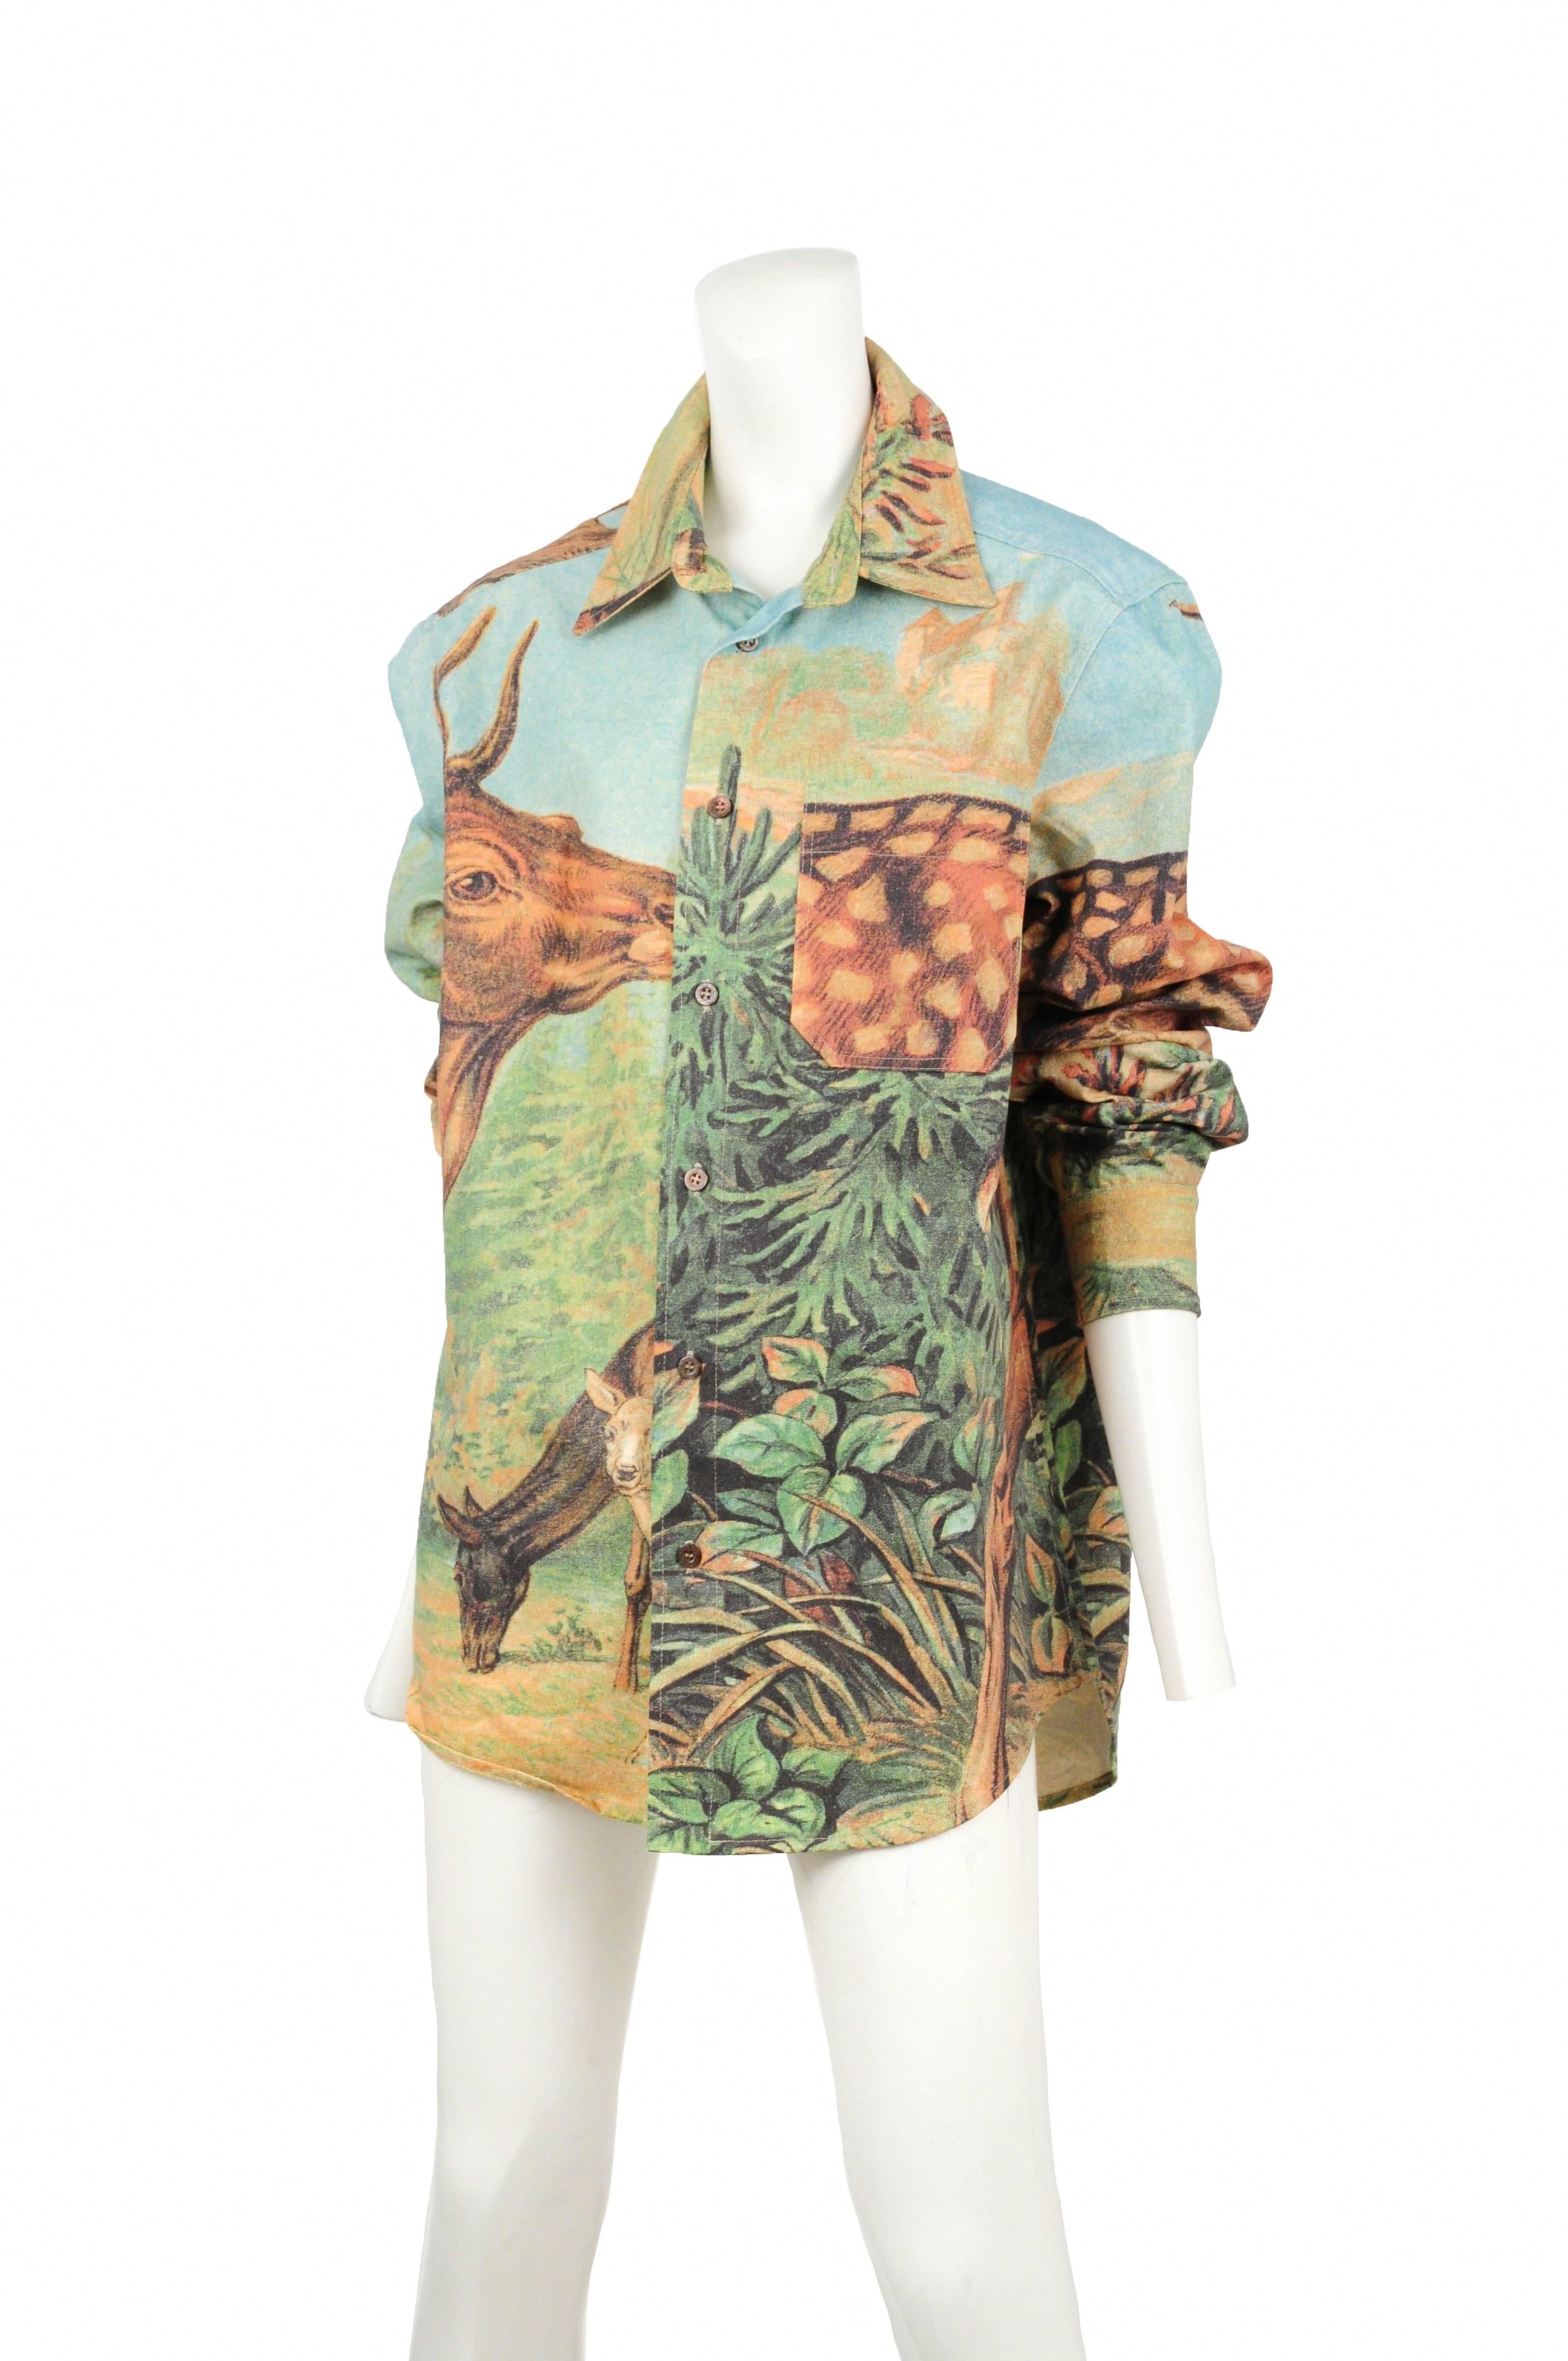 Vintage Wild & Lethal Trash mens or unisex waxed canvas deer print shirt.
Please inquire for additional images.